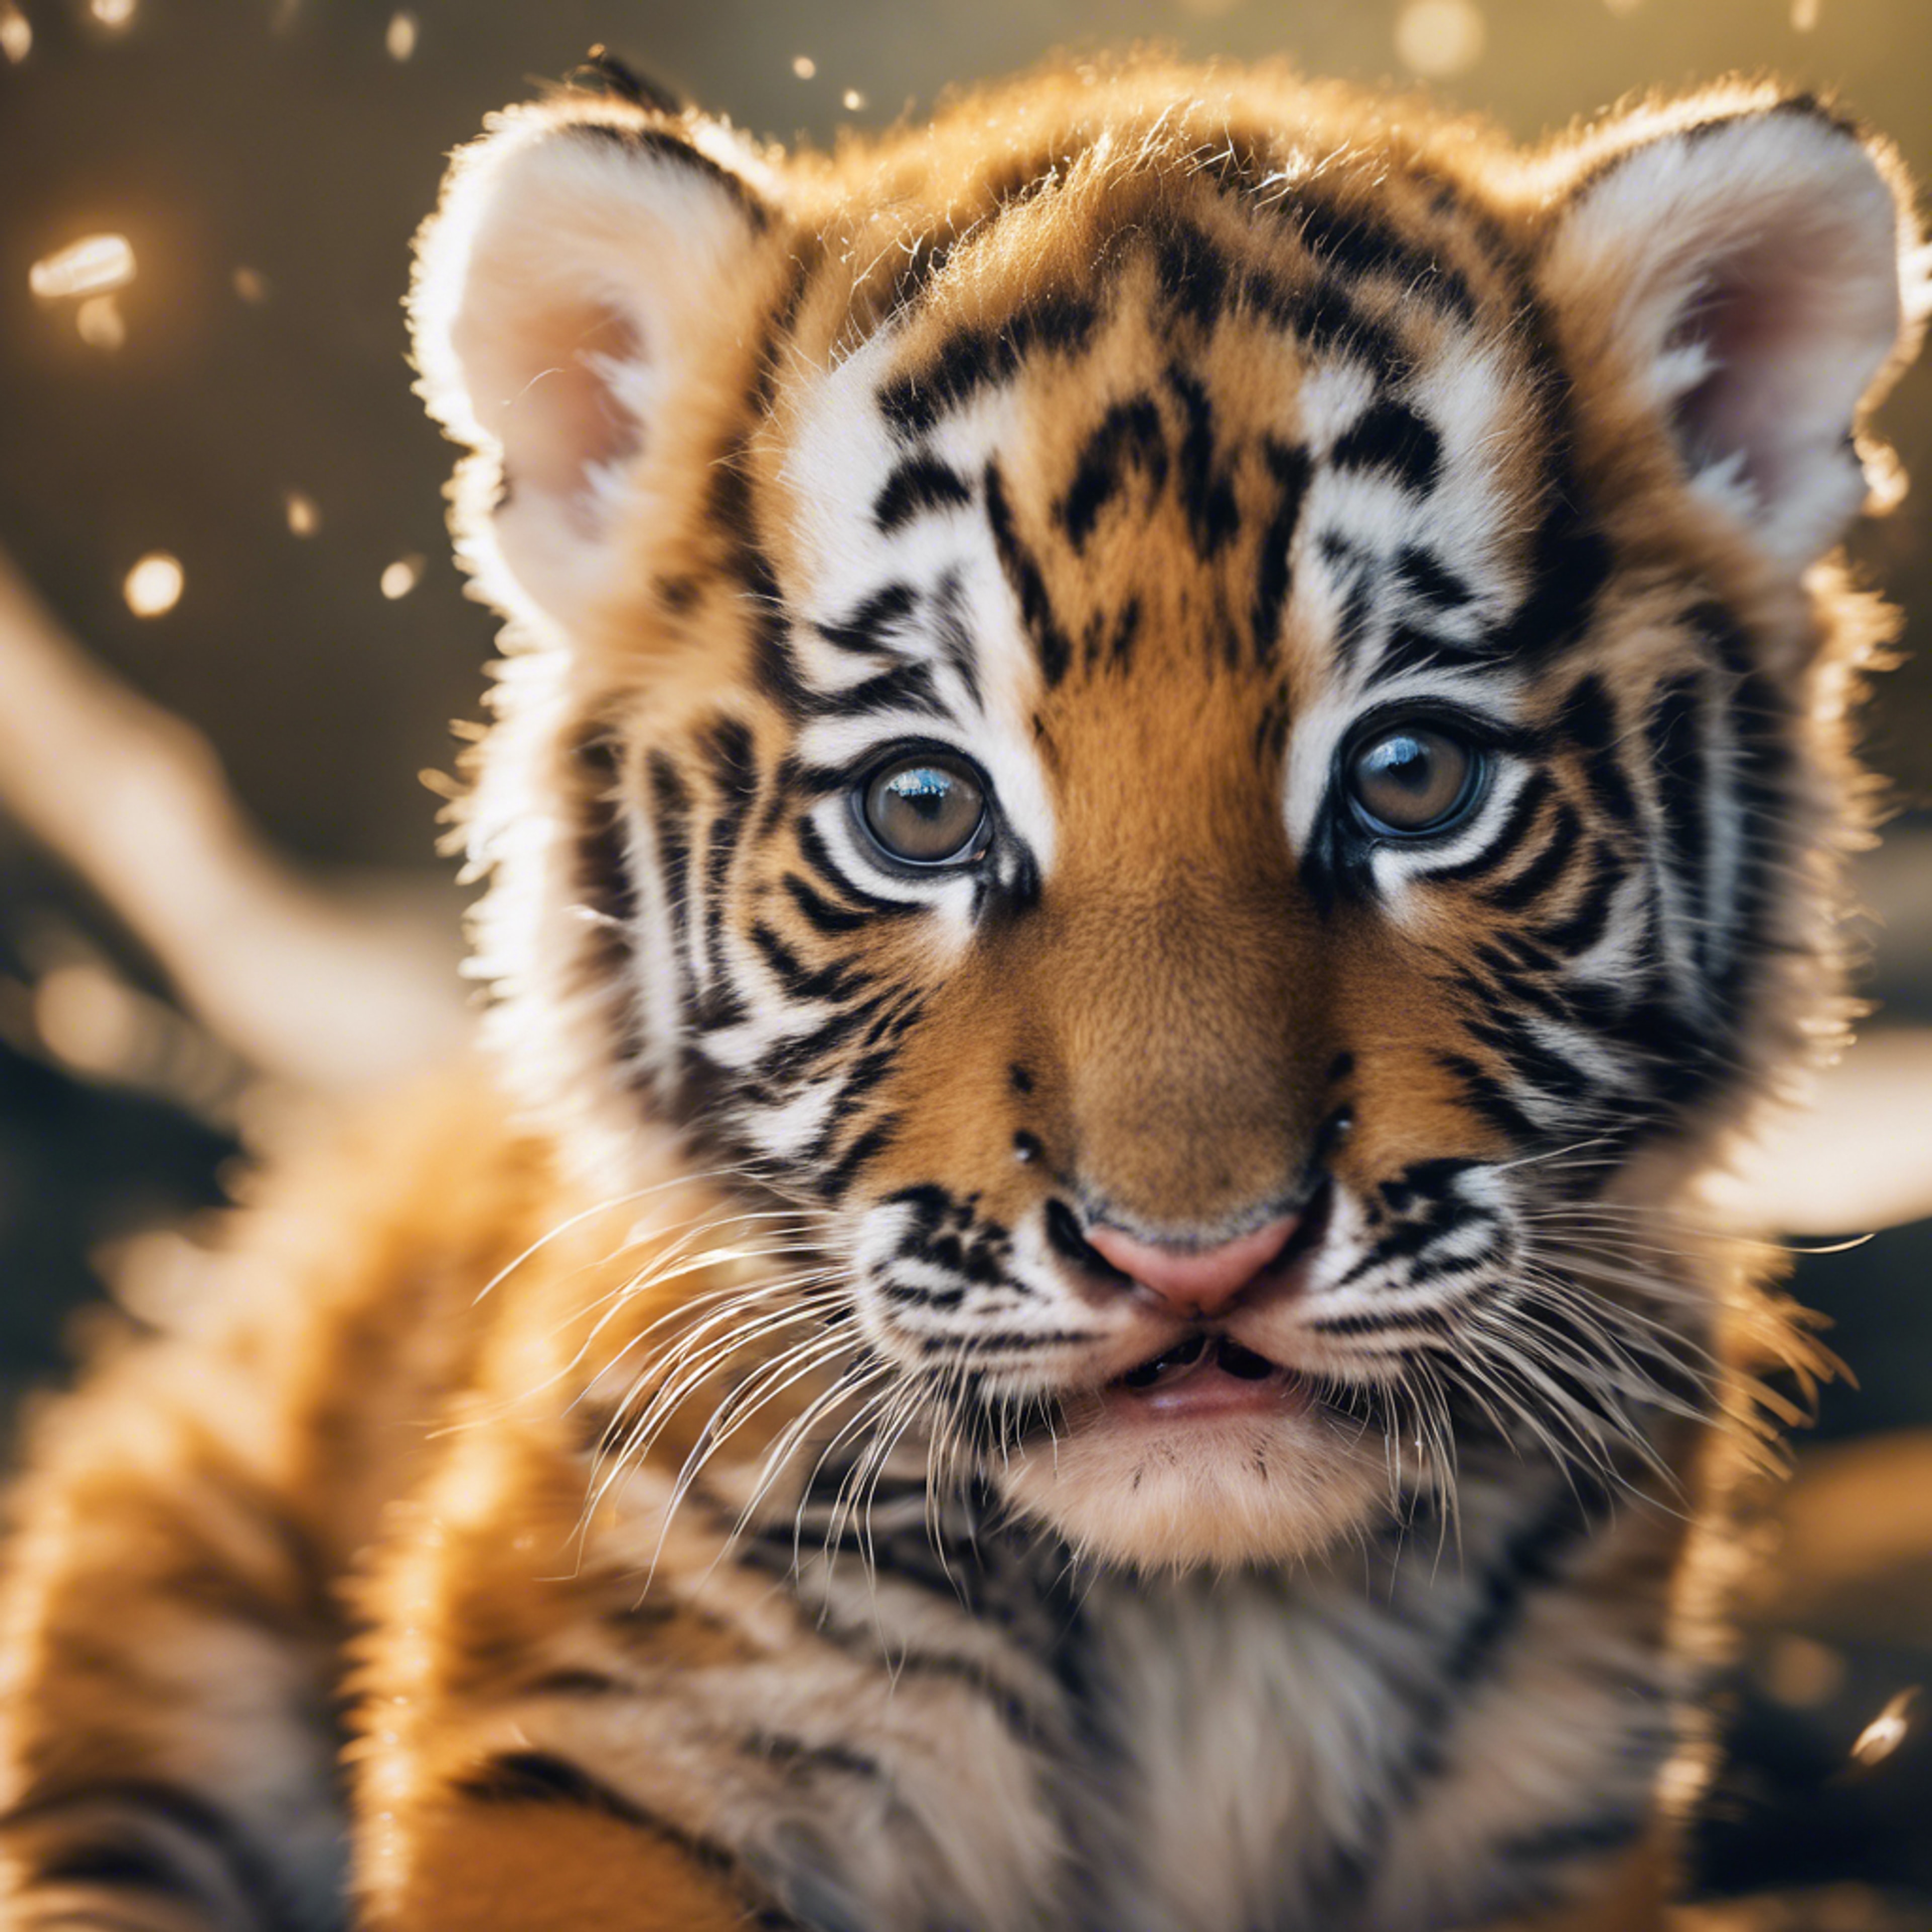 A lively orange tiger cub with large round eyes in a kawaii rendering. Wallpaper[41206ae9e13545bea05a]